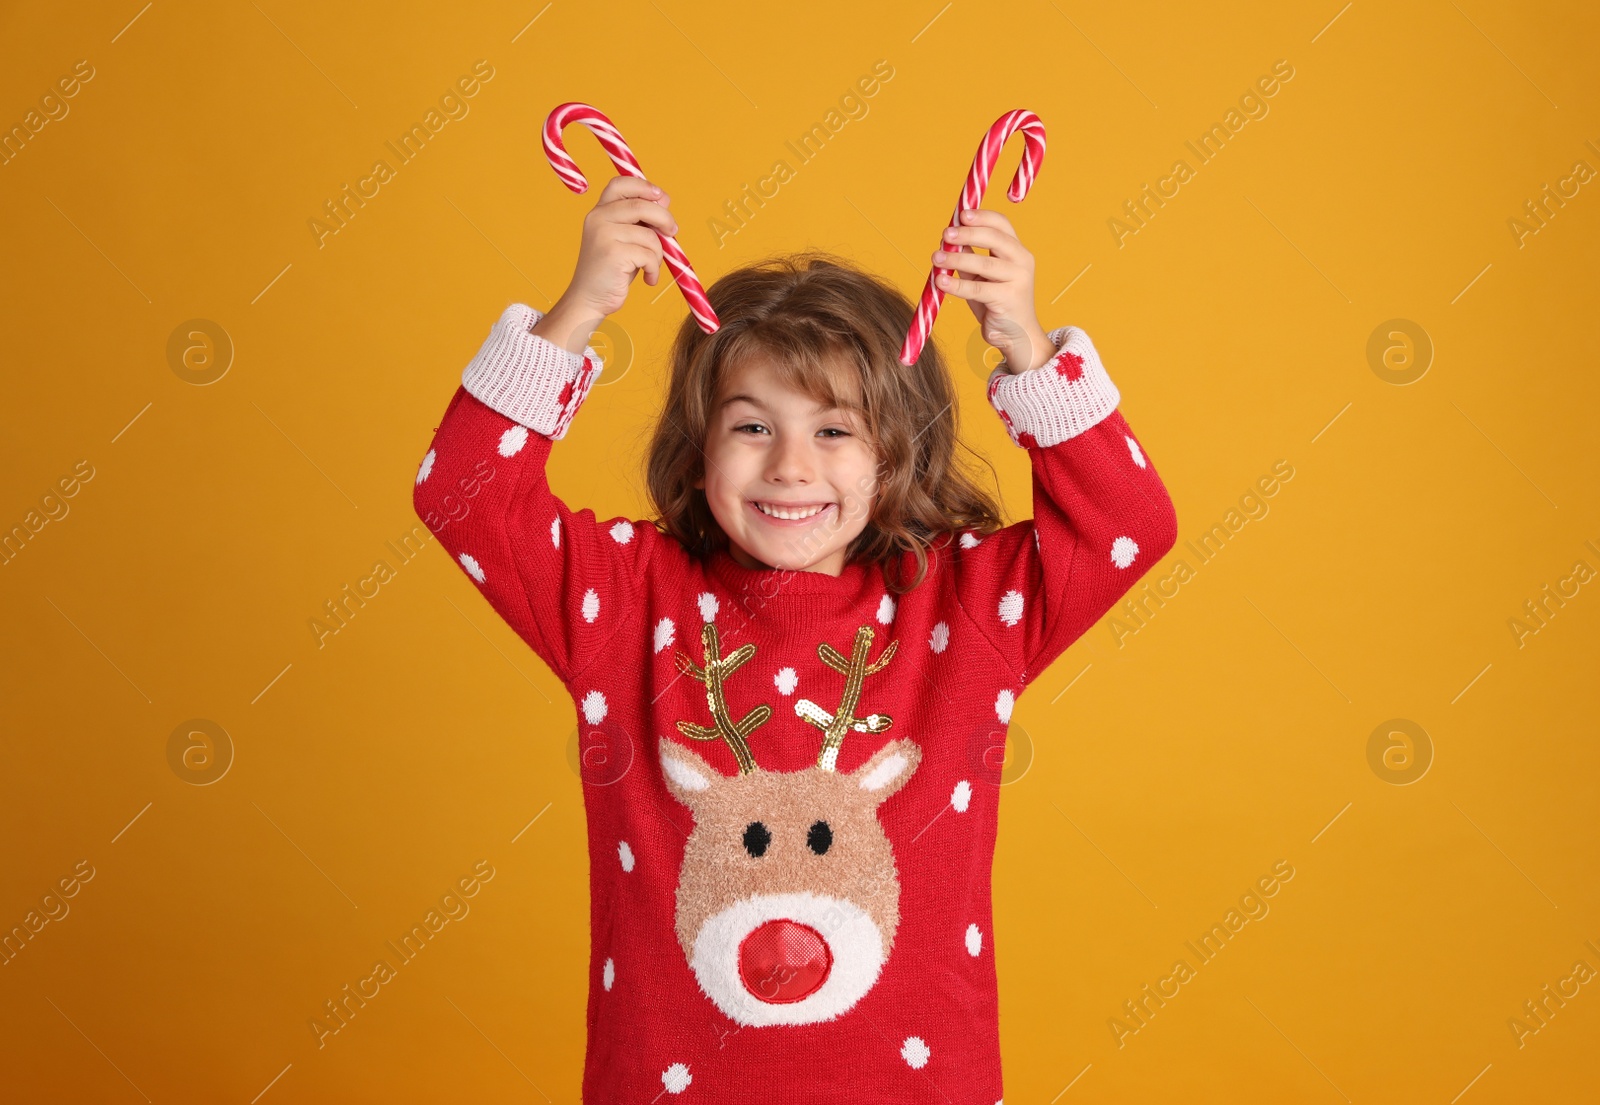 Photo of Cute little girl in Christmas sweater holding sweet candy canes near head against orange background